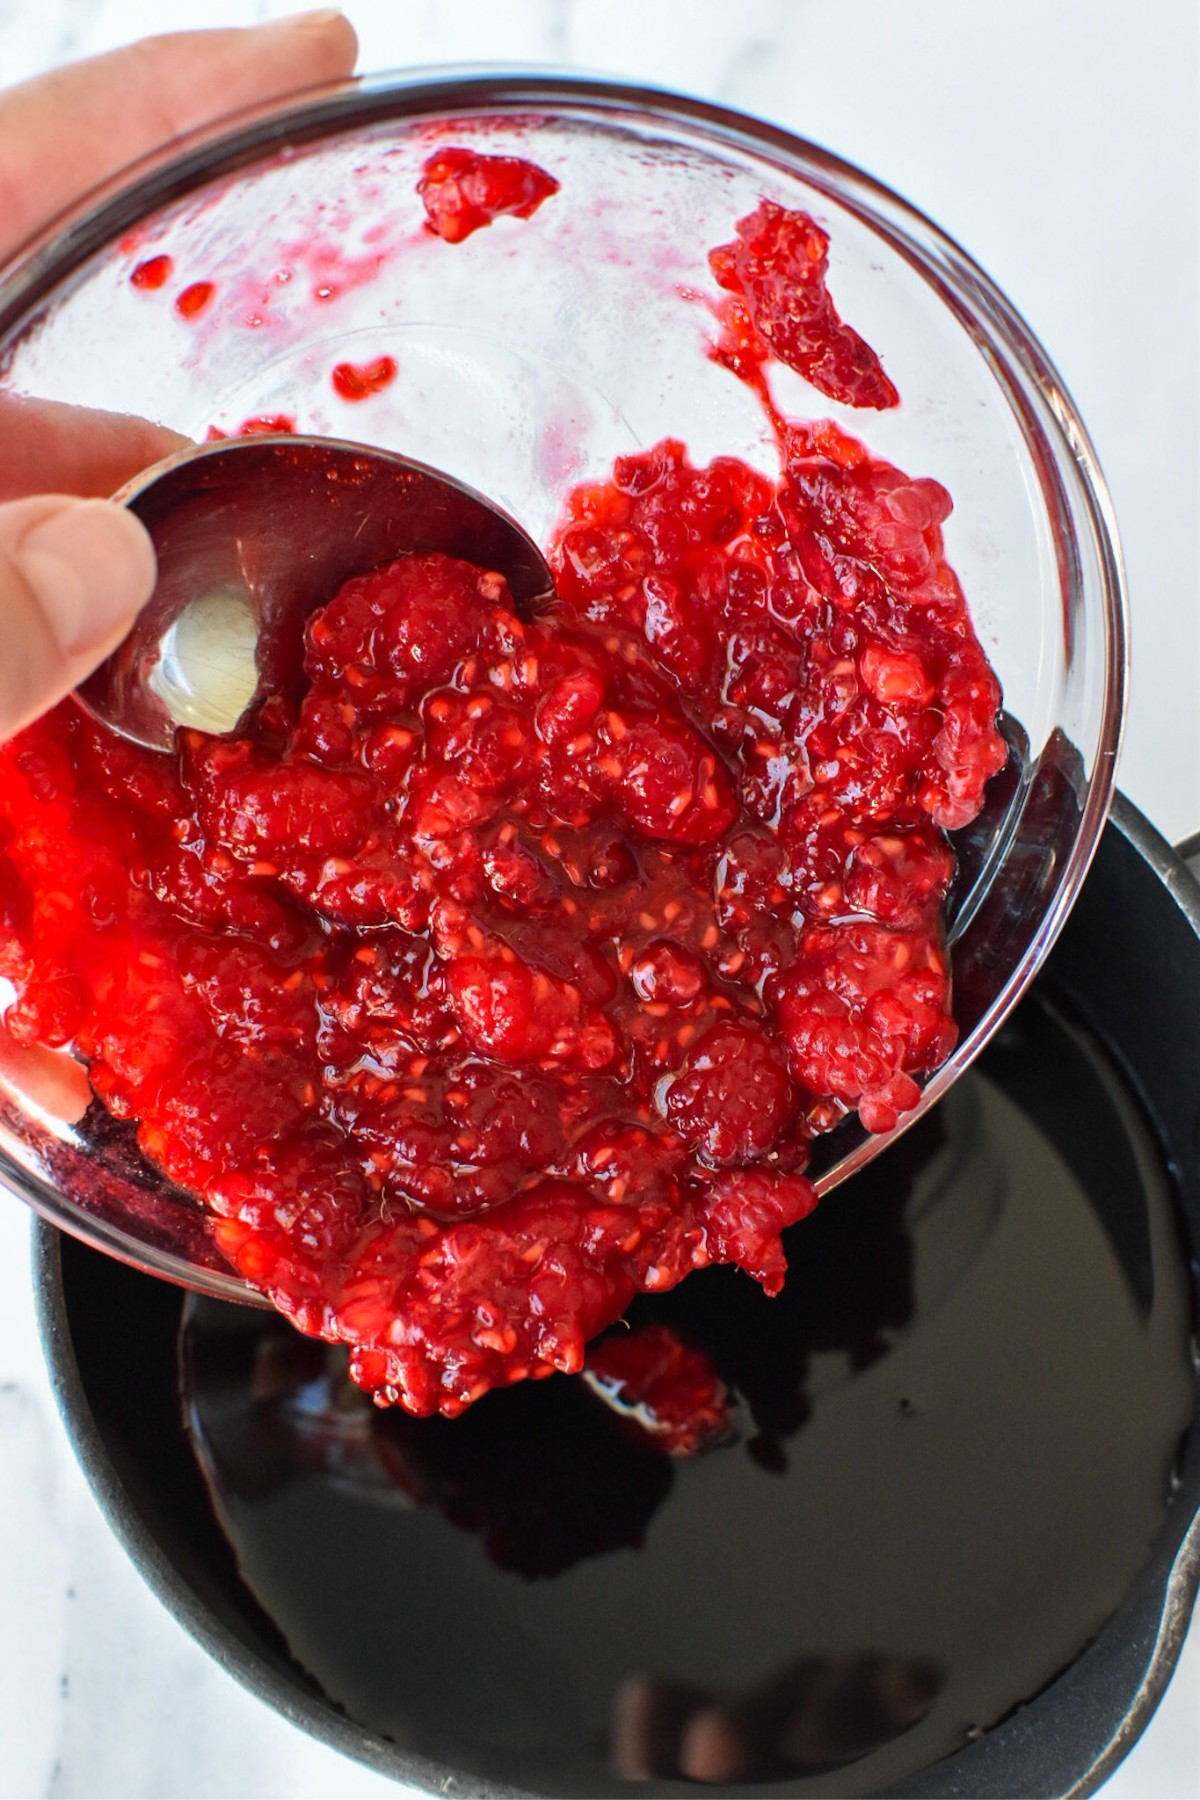 Smashed raspberries are being poured into a small saucepan of balsamic vinegar.